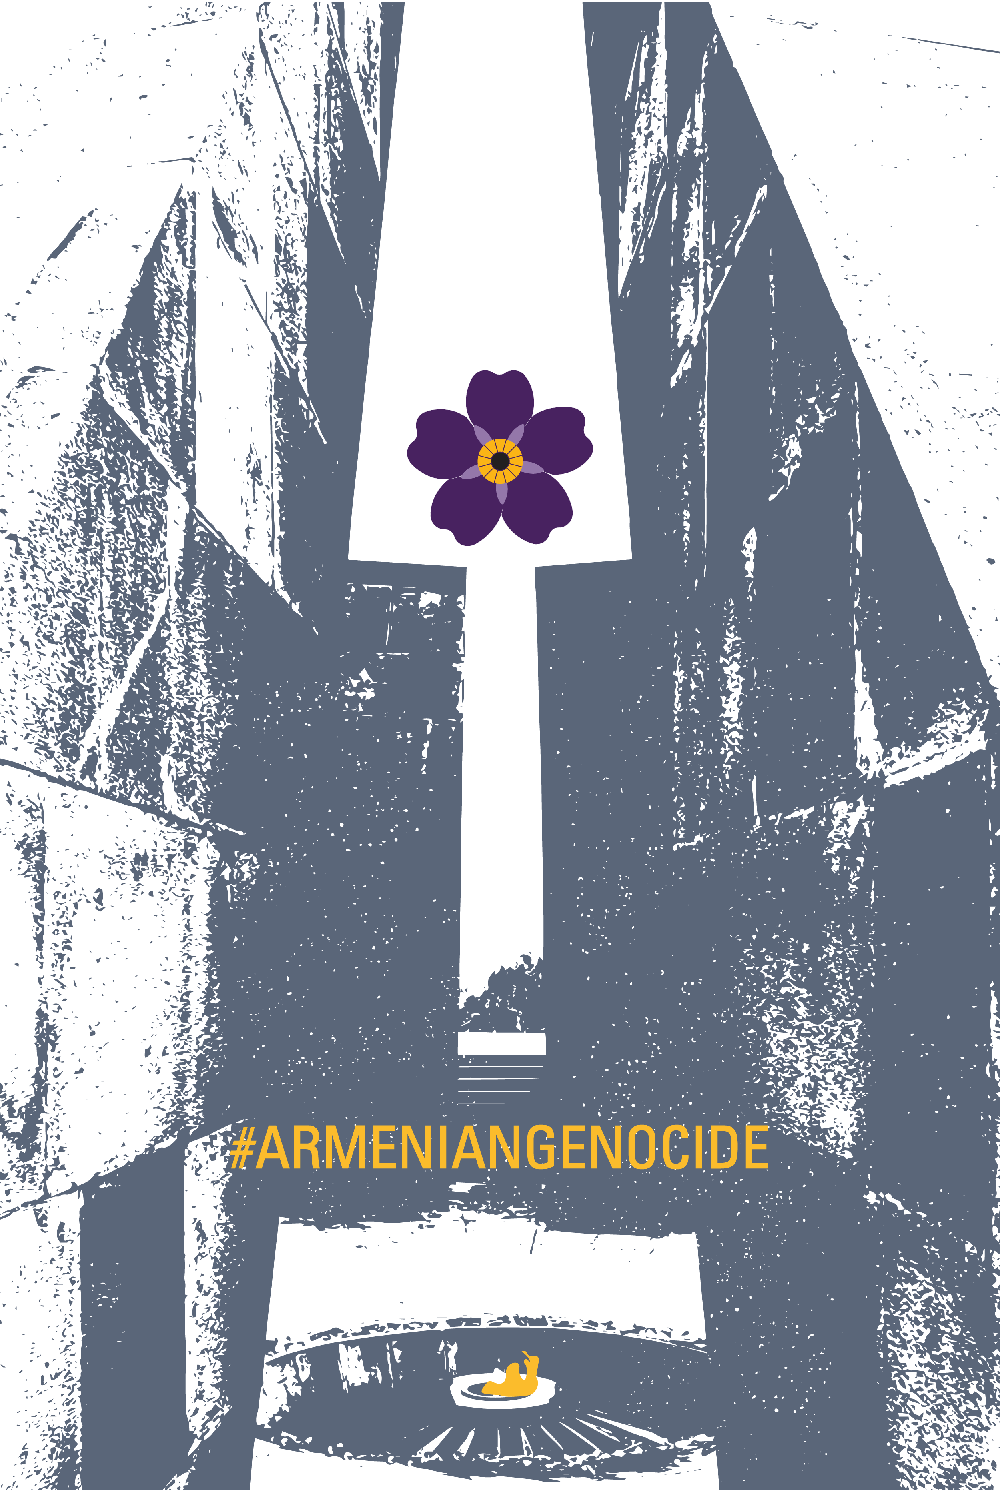 The Zovighian Partnership Public Office co-signed statement on Armenian Genocide Remembrance 2021